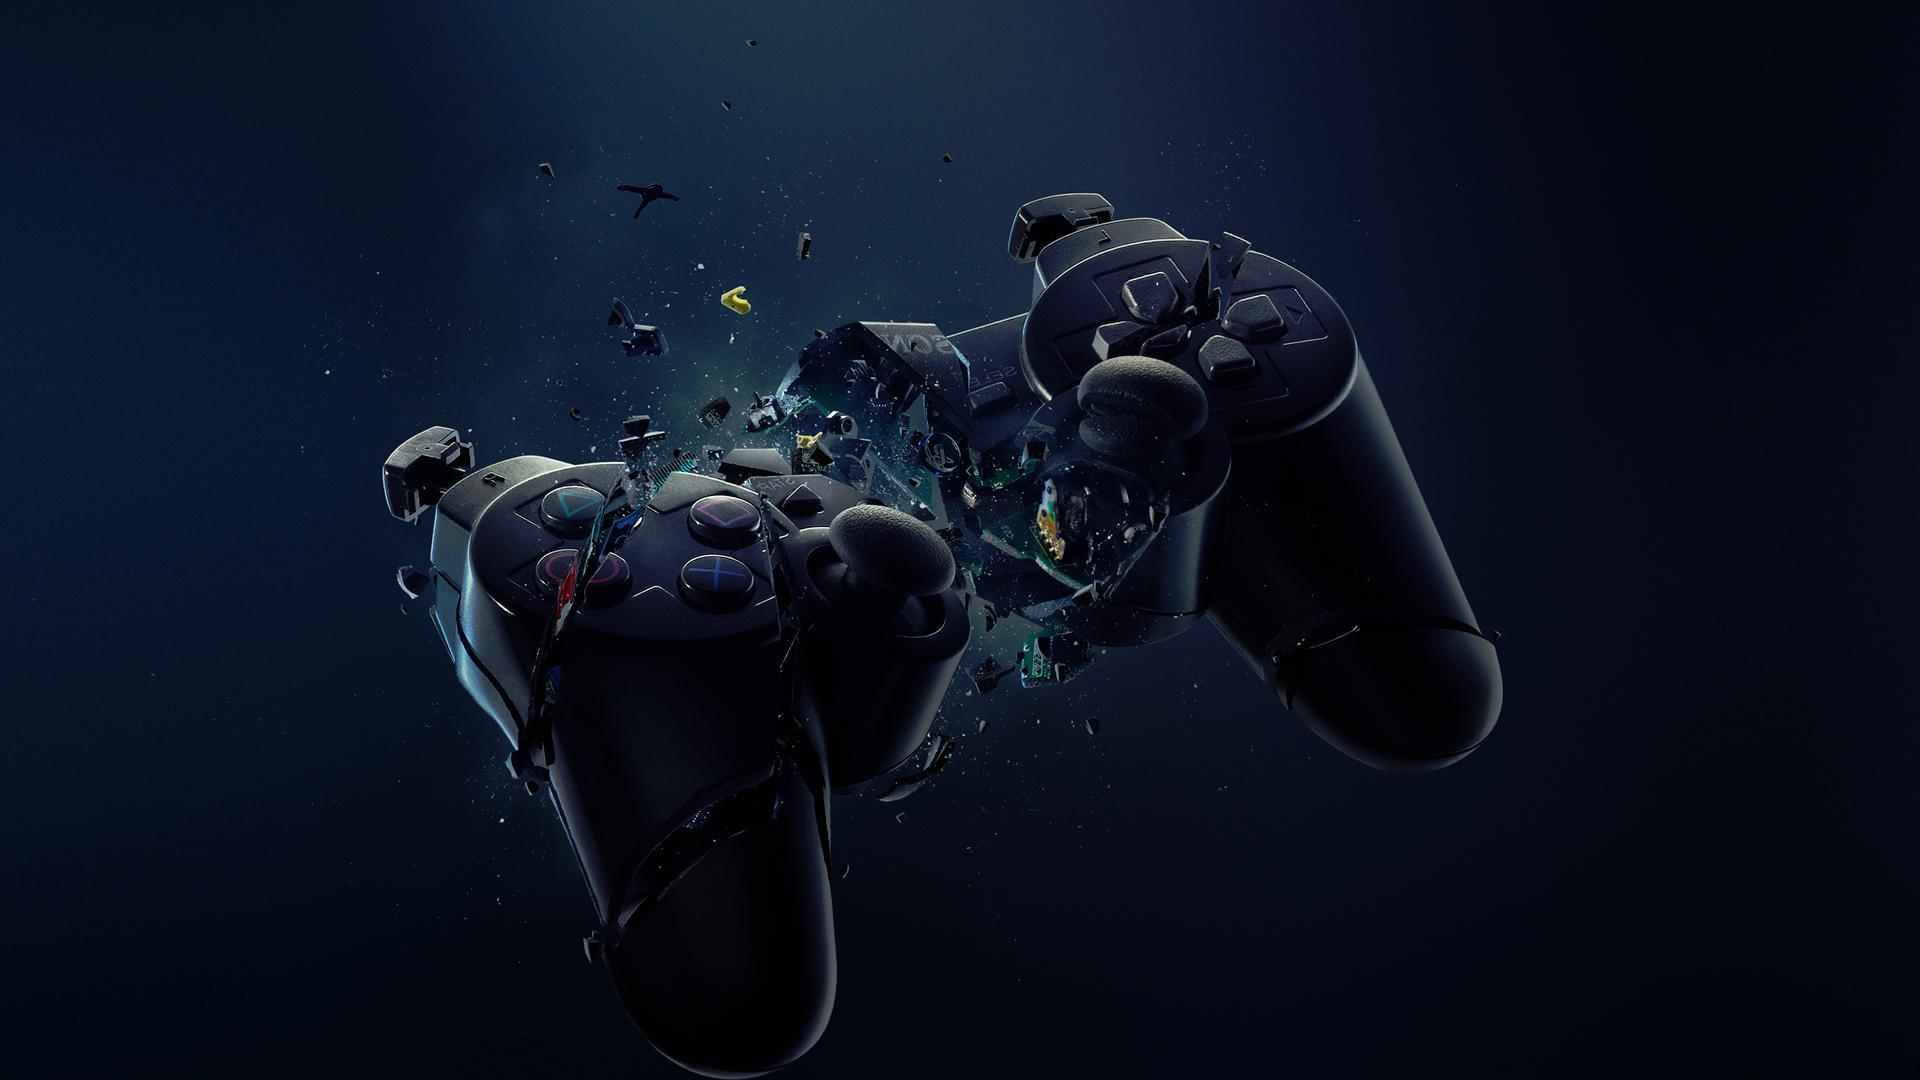 Playstation HD Wallpaper and Background Image